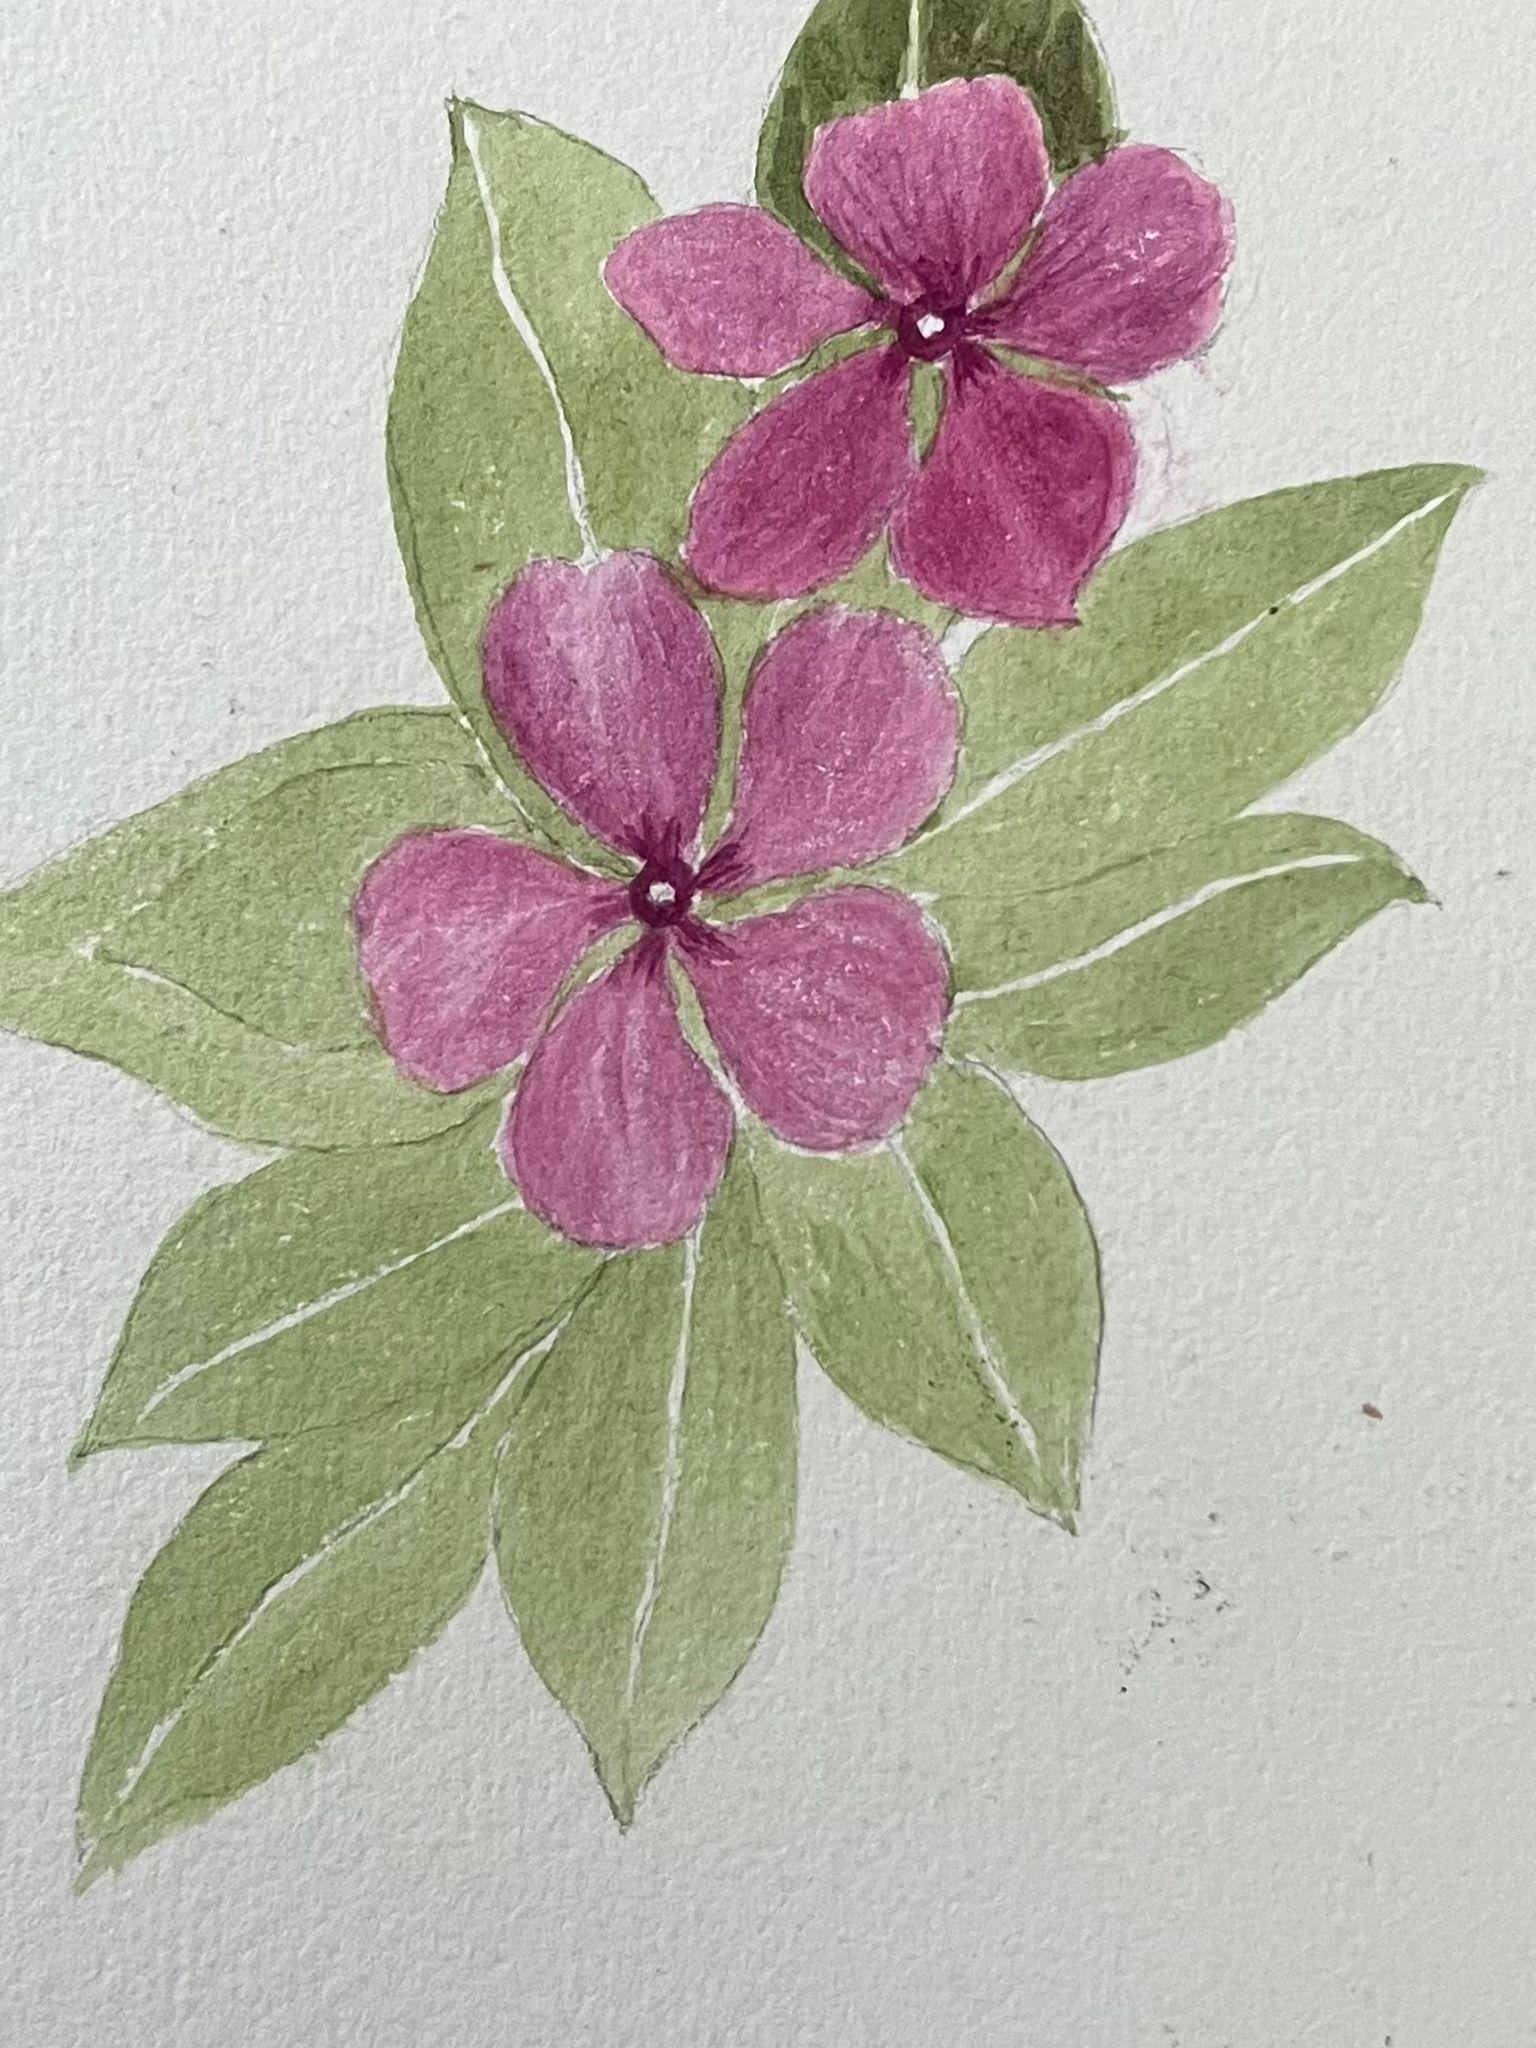 Fine Antique British Botanical Painting Pink Periwinkle Flower and Leaf 1